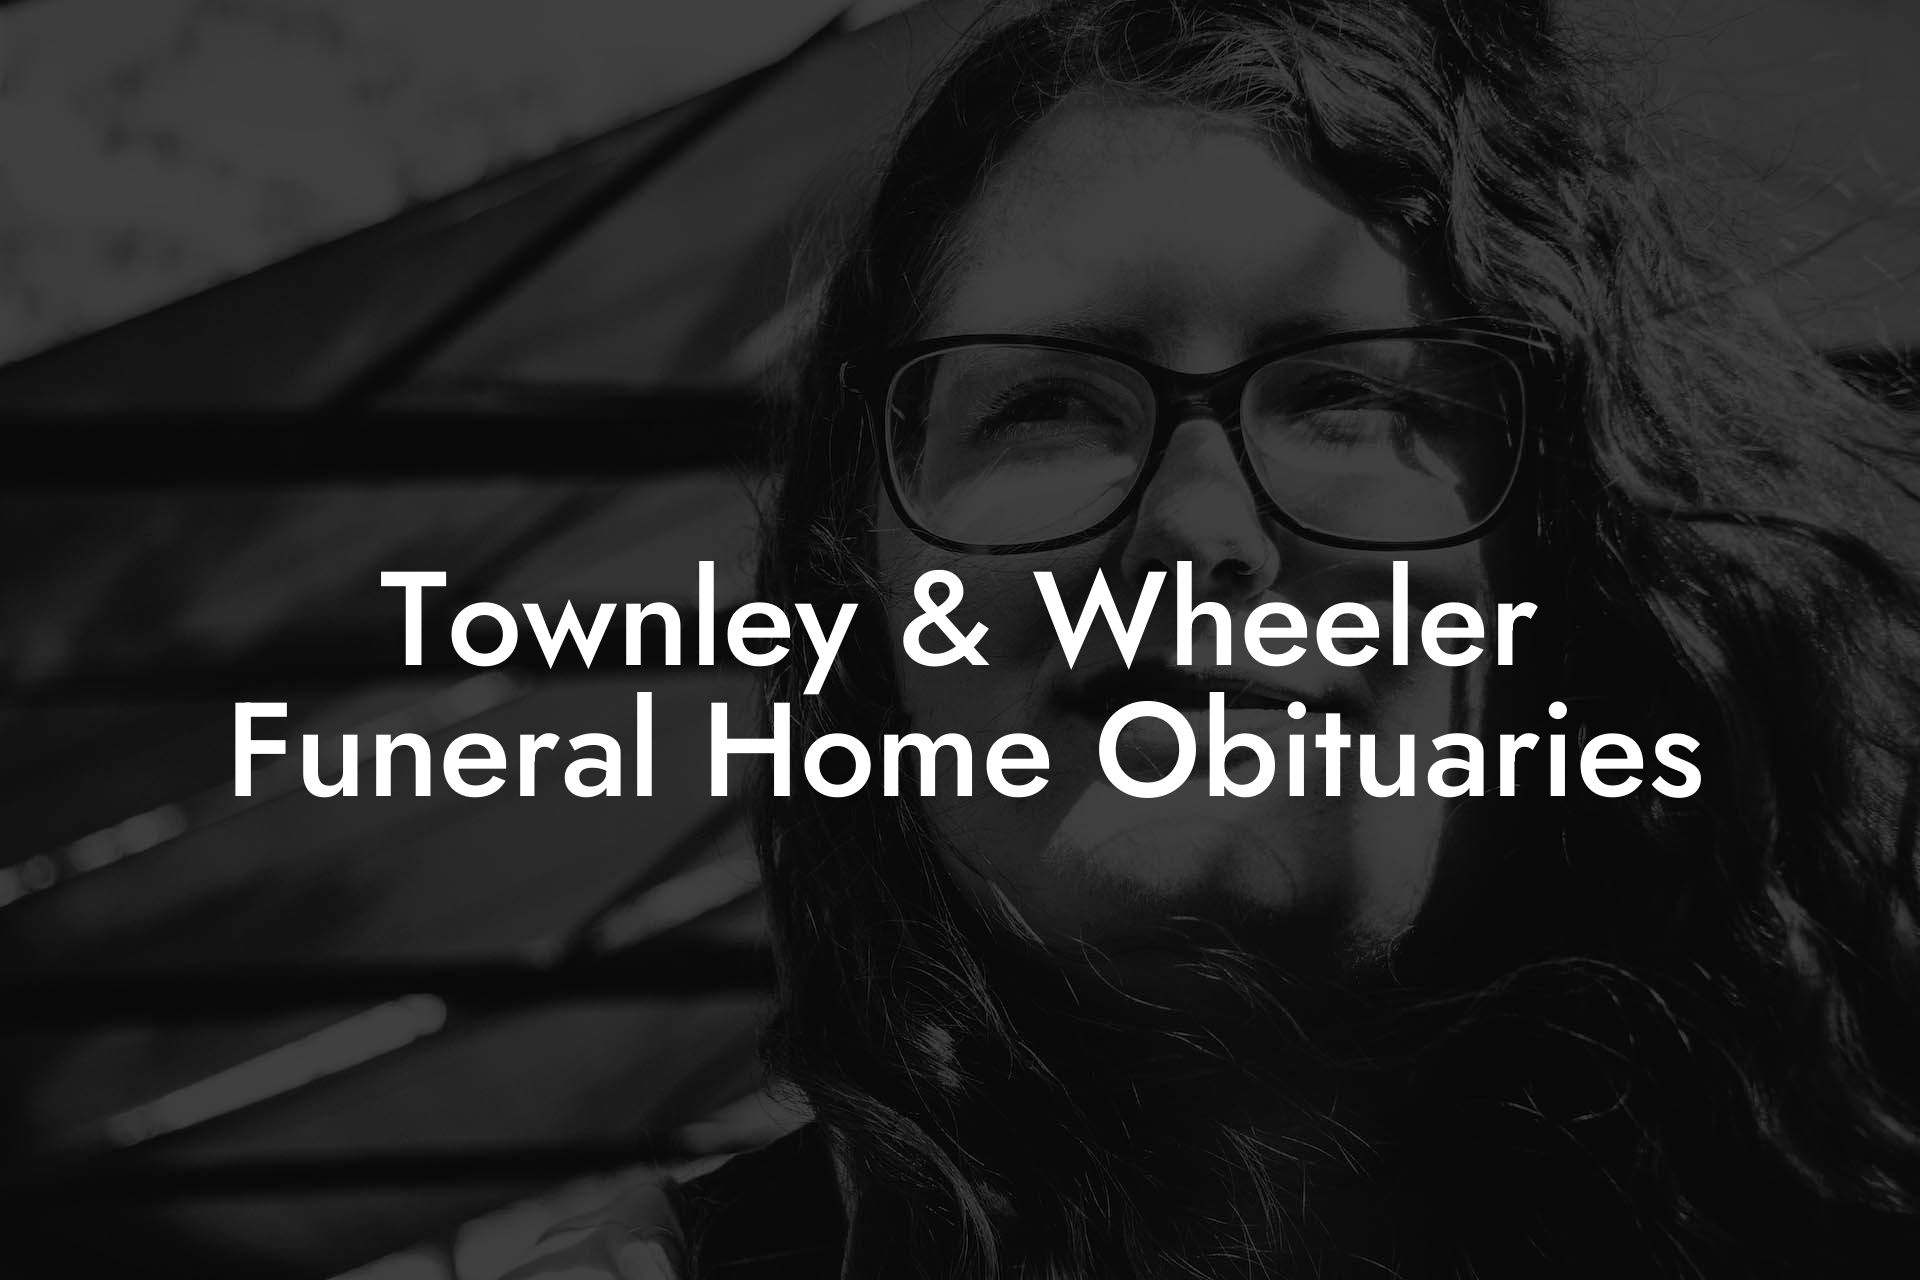 Townley & Wheeler Funeral Home Obituaries